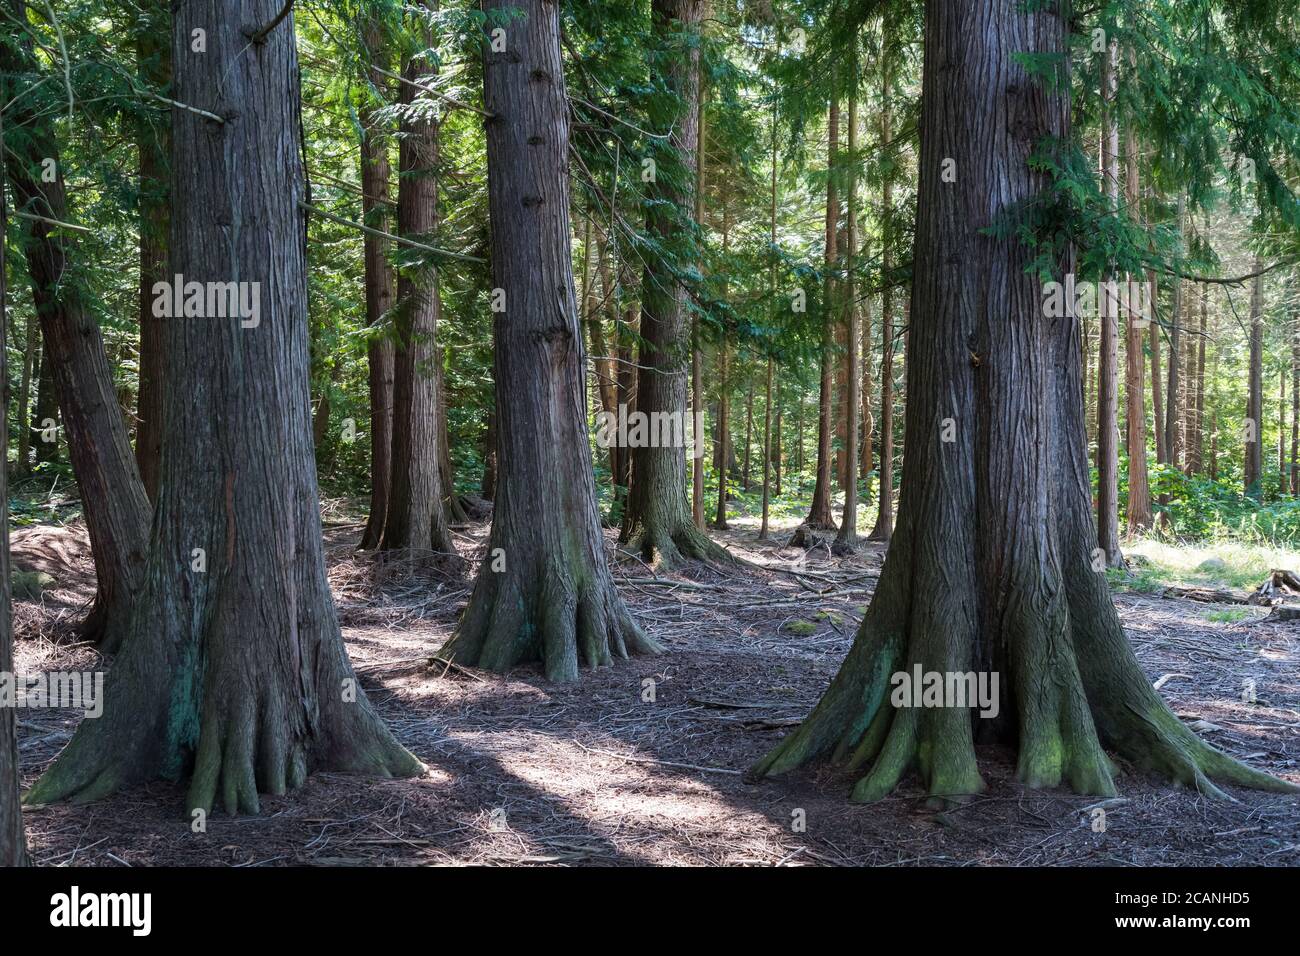 Big planted Thuja trees in a forest at the island Oland in Sweden Stock Photo